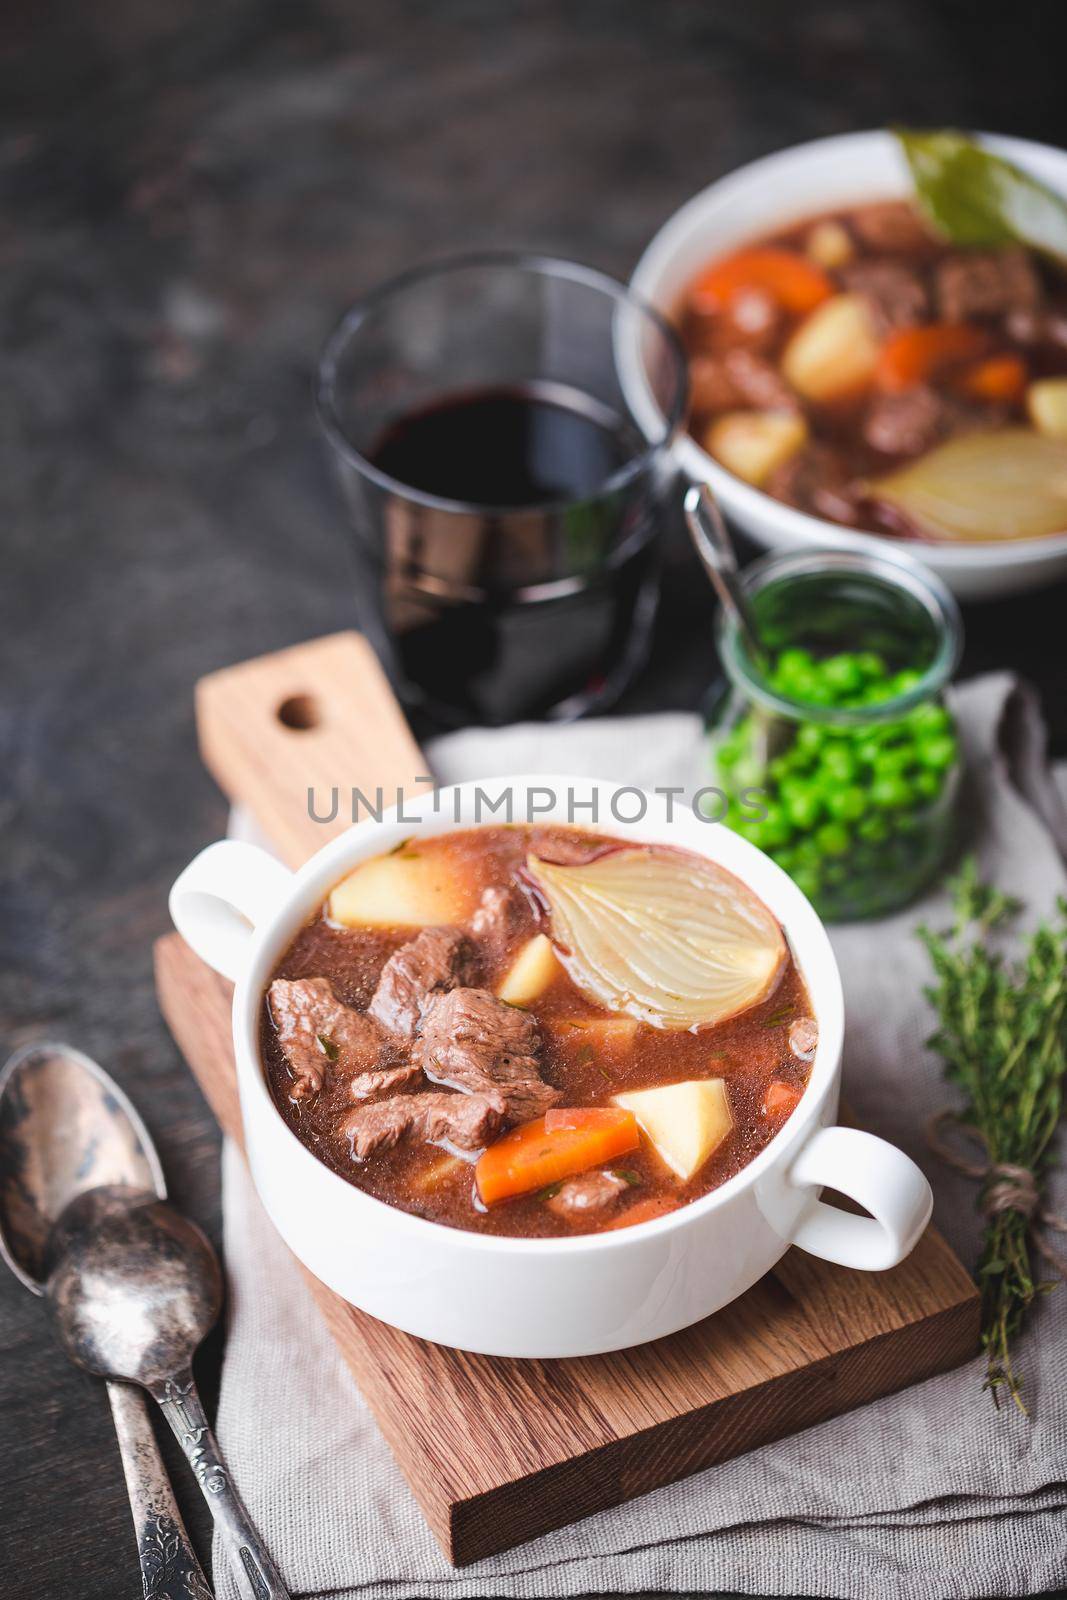 Meat stew with beef, potato, carrot, onion, spices, green peas. Slow cooked meat stew, bowl, wooden background. Hot autumn/winter dish. Selective focus. Comfort food. Homemade soup/ragout/casserole